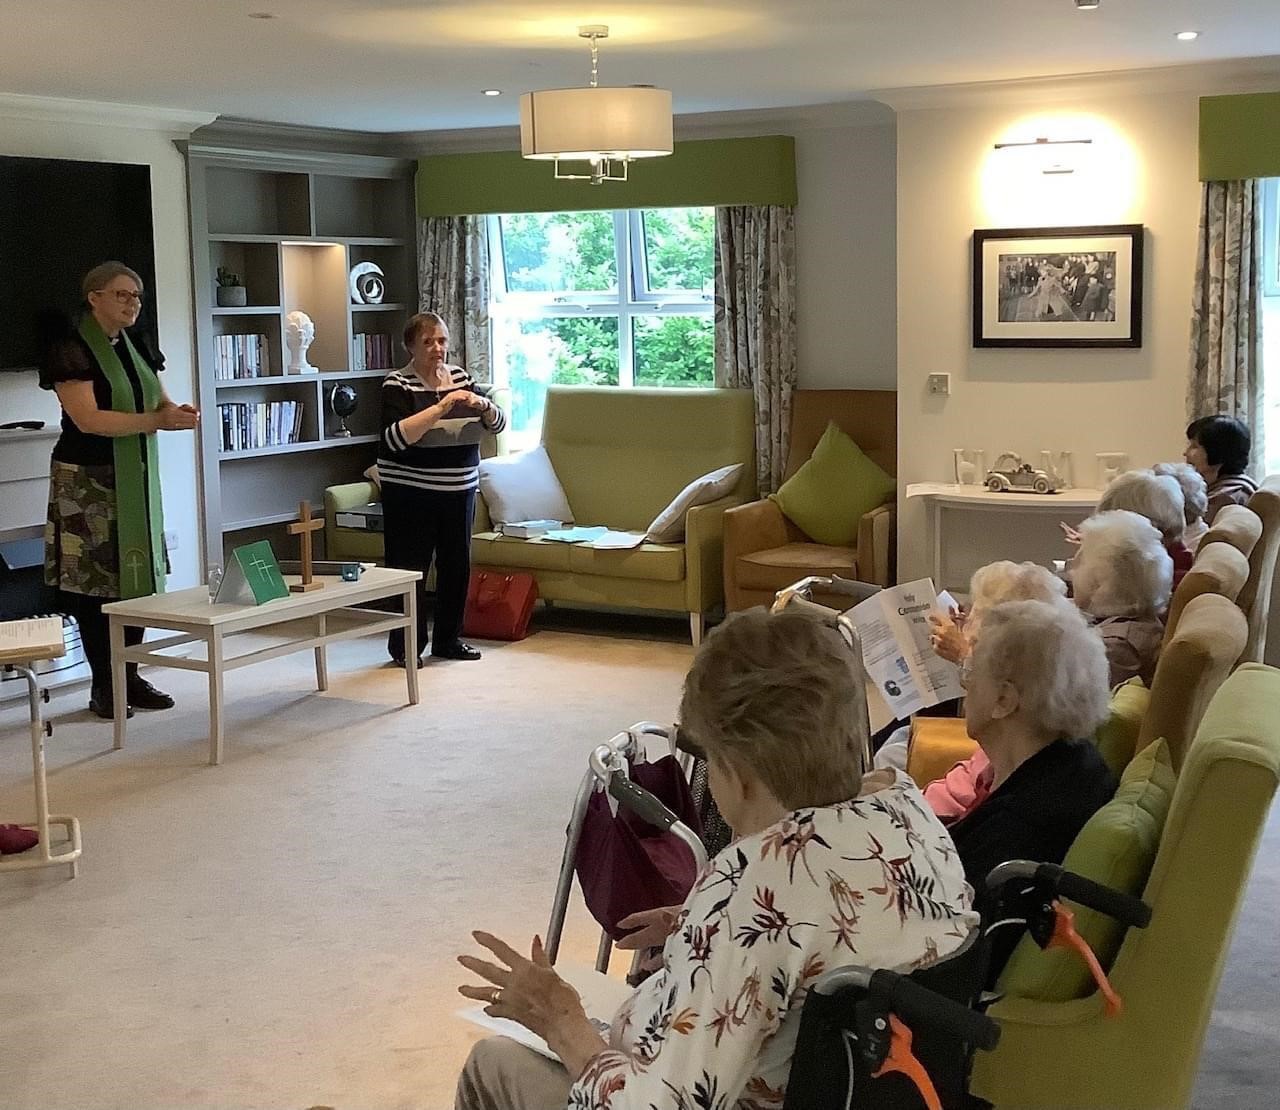 Mel Beynon stands in front of a group of residents of a local care home to lead worship